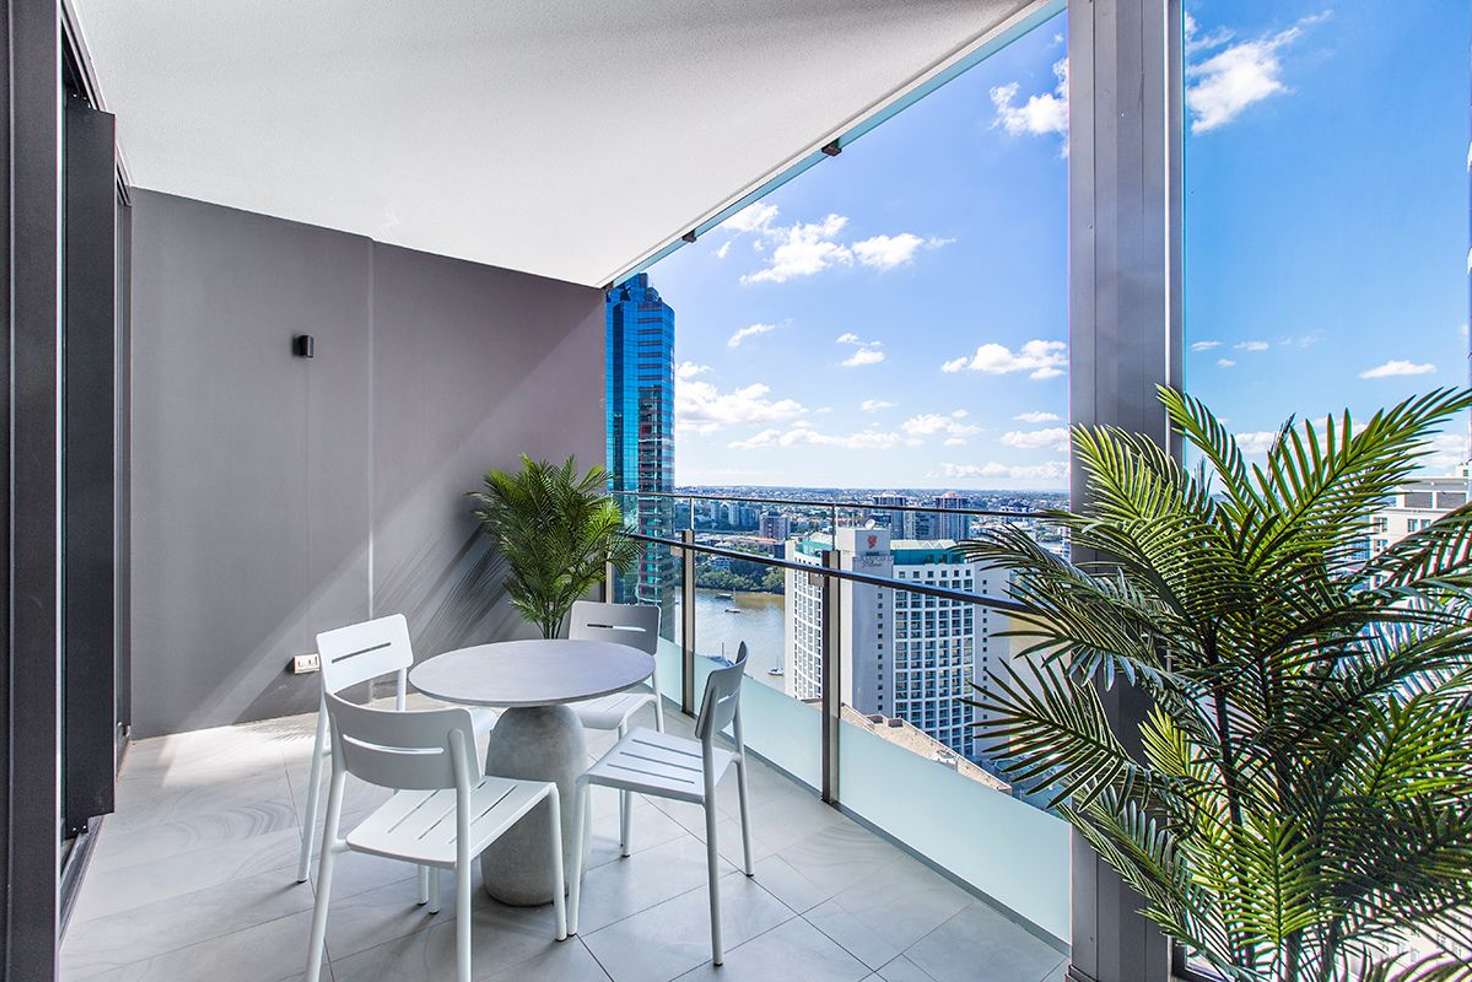 Main view of Homely apartment listing, 2508/111 Mary Street, Brisbane QLD 4000